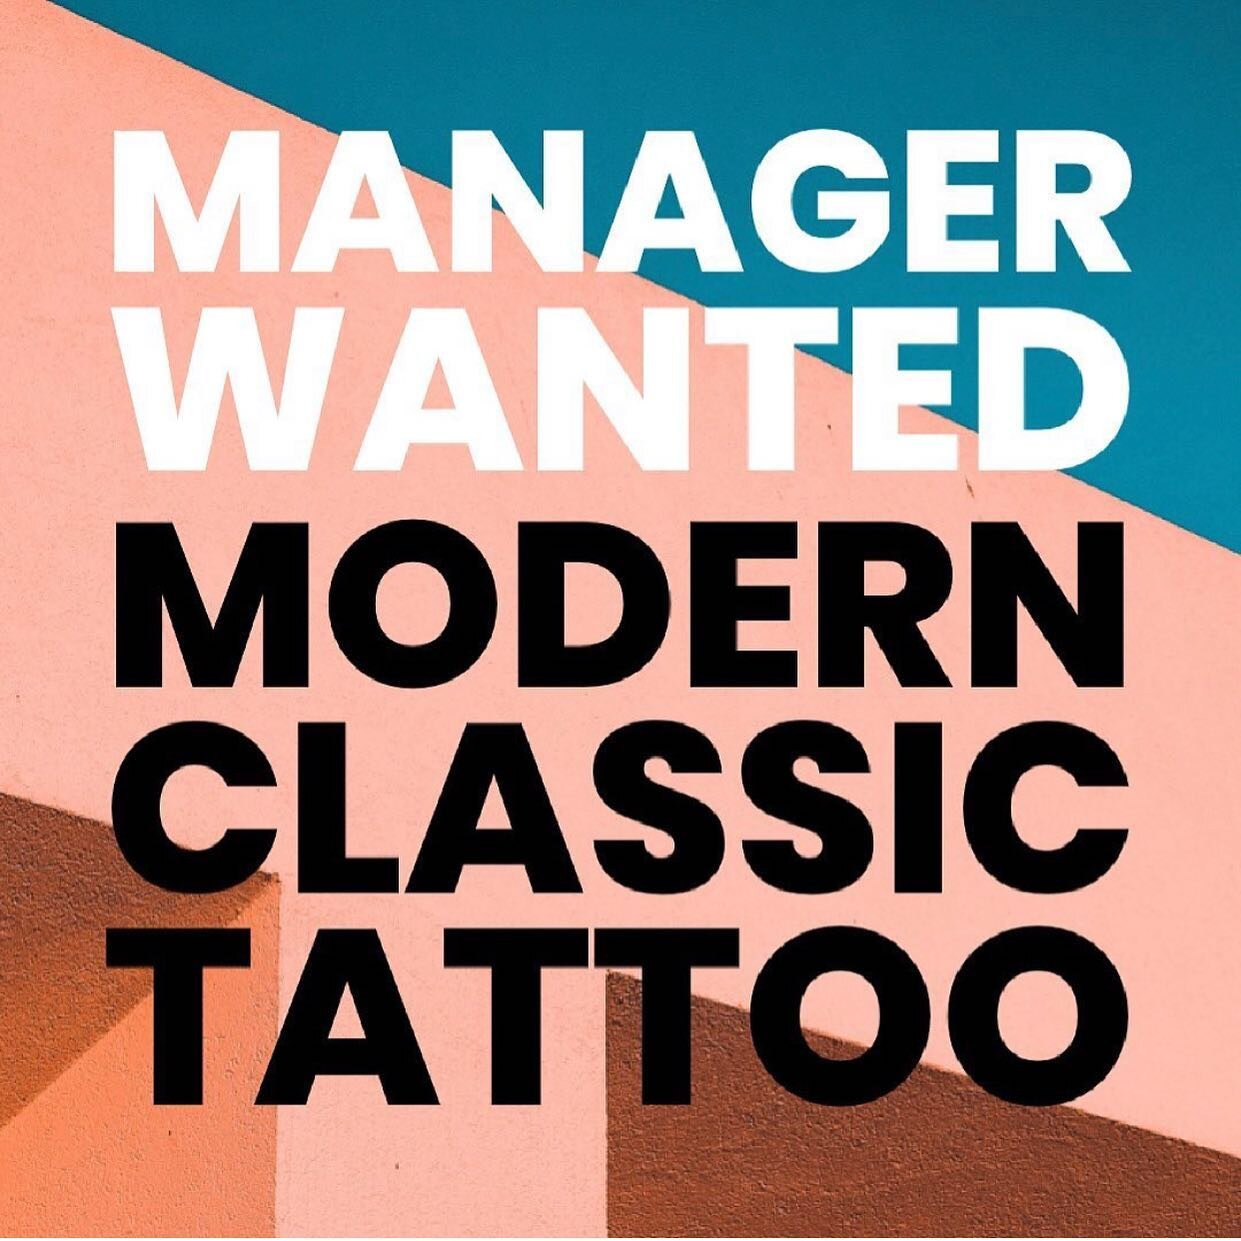 Email your CV to modernclassictattoo@gmail.com 
We need someone full-time to manage the shop, artist calendars, take bookings, be front-of-house, social media etc.